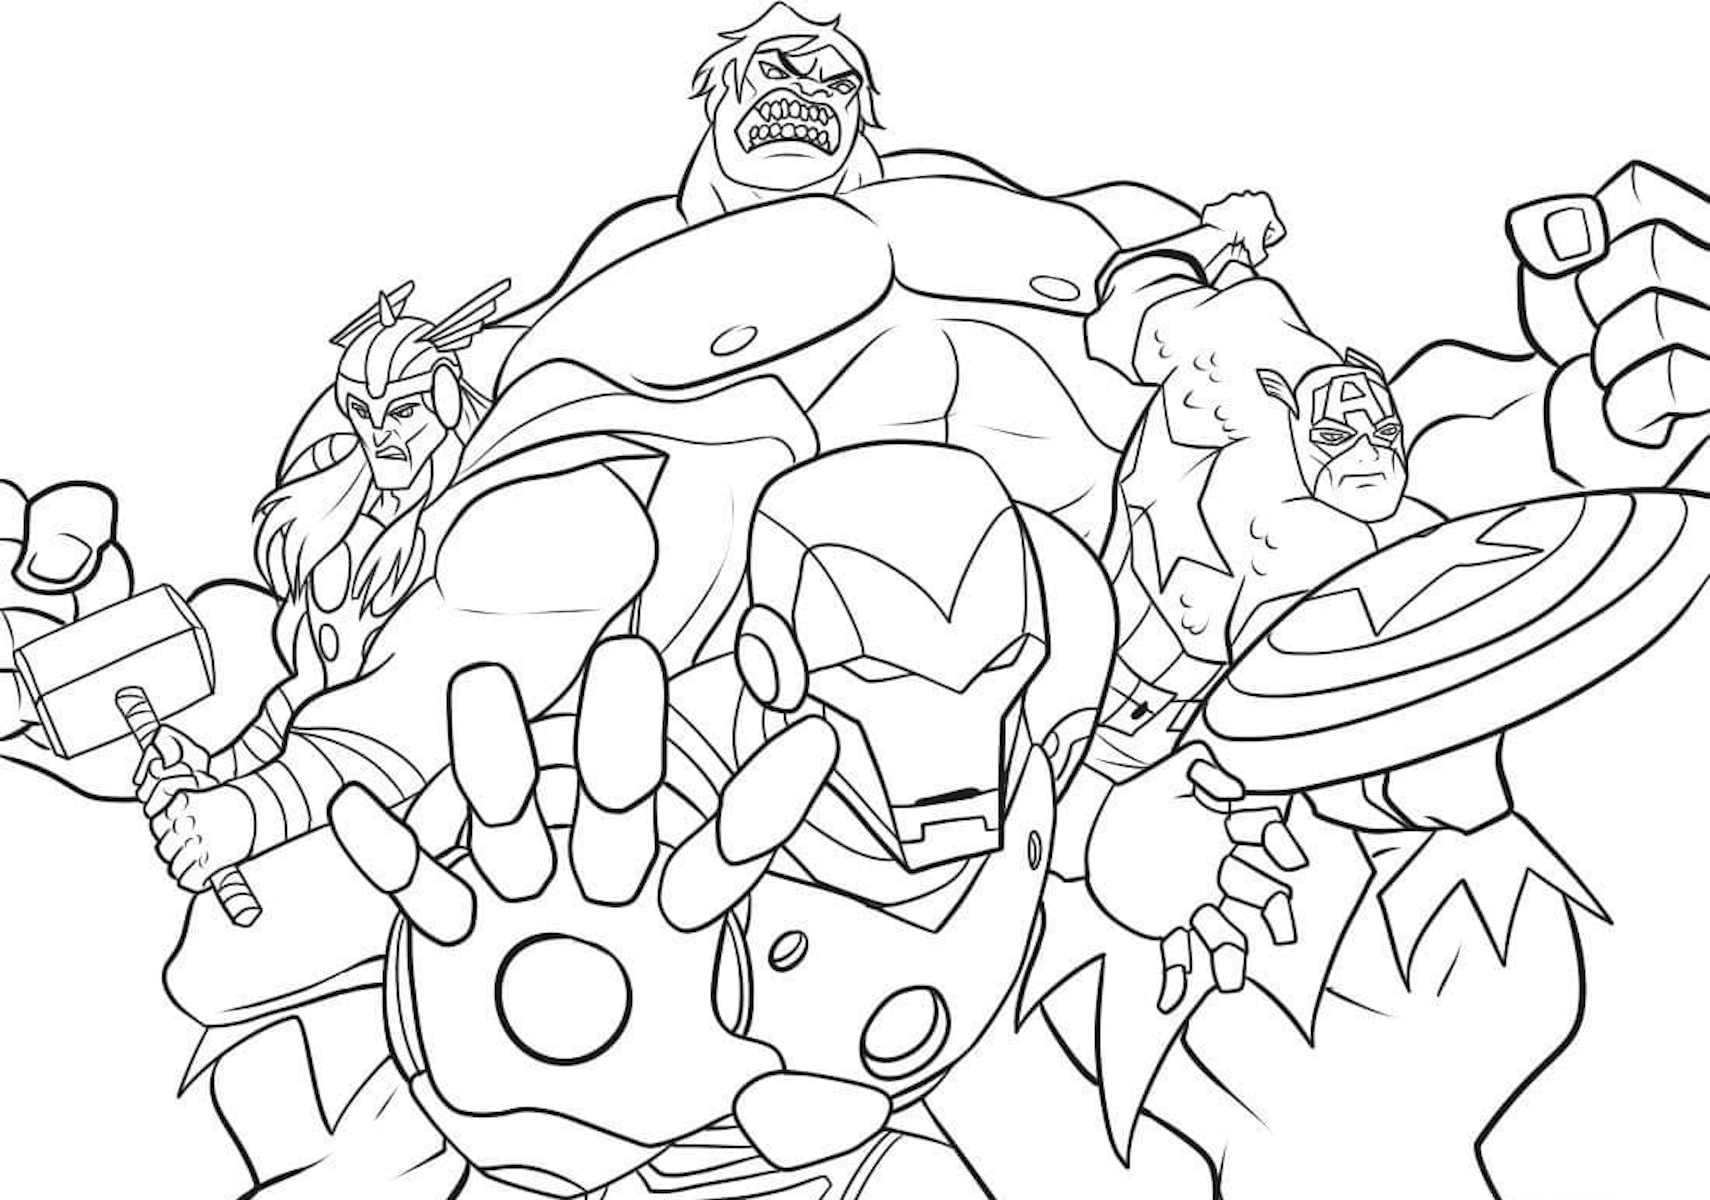 Avengers 25  coloring page to print and coloring